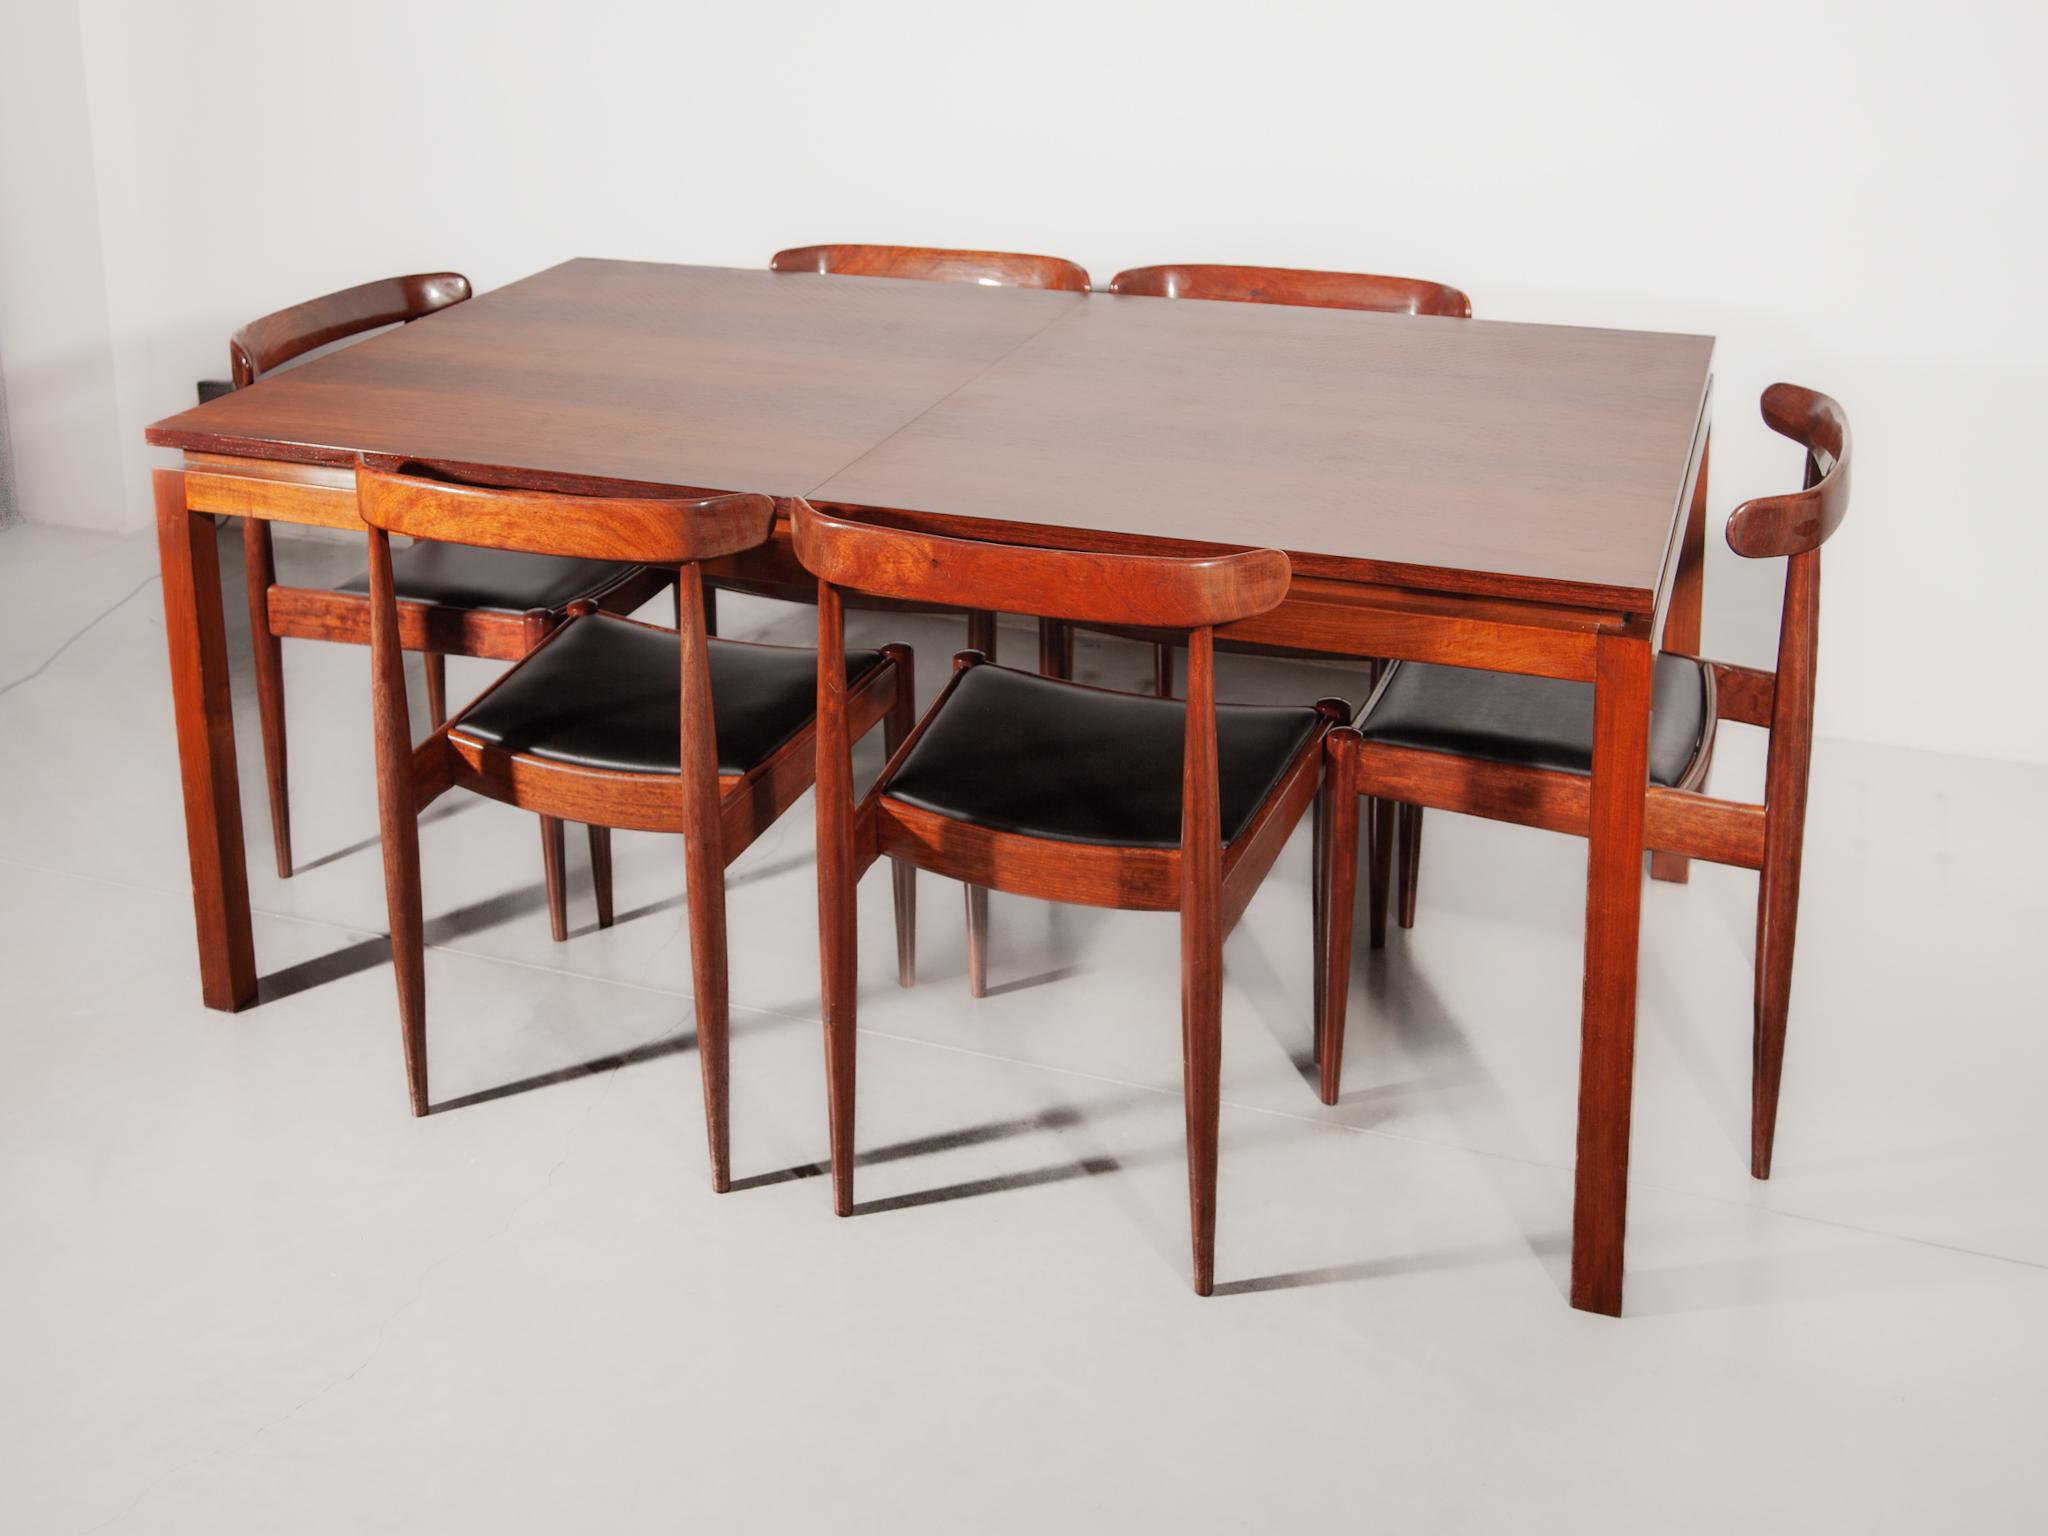 Hand-Crafted Diningroom Set Table and Six Chairs by Alfred Hendrickx 1960s for Belform